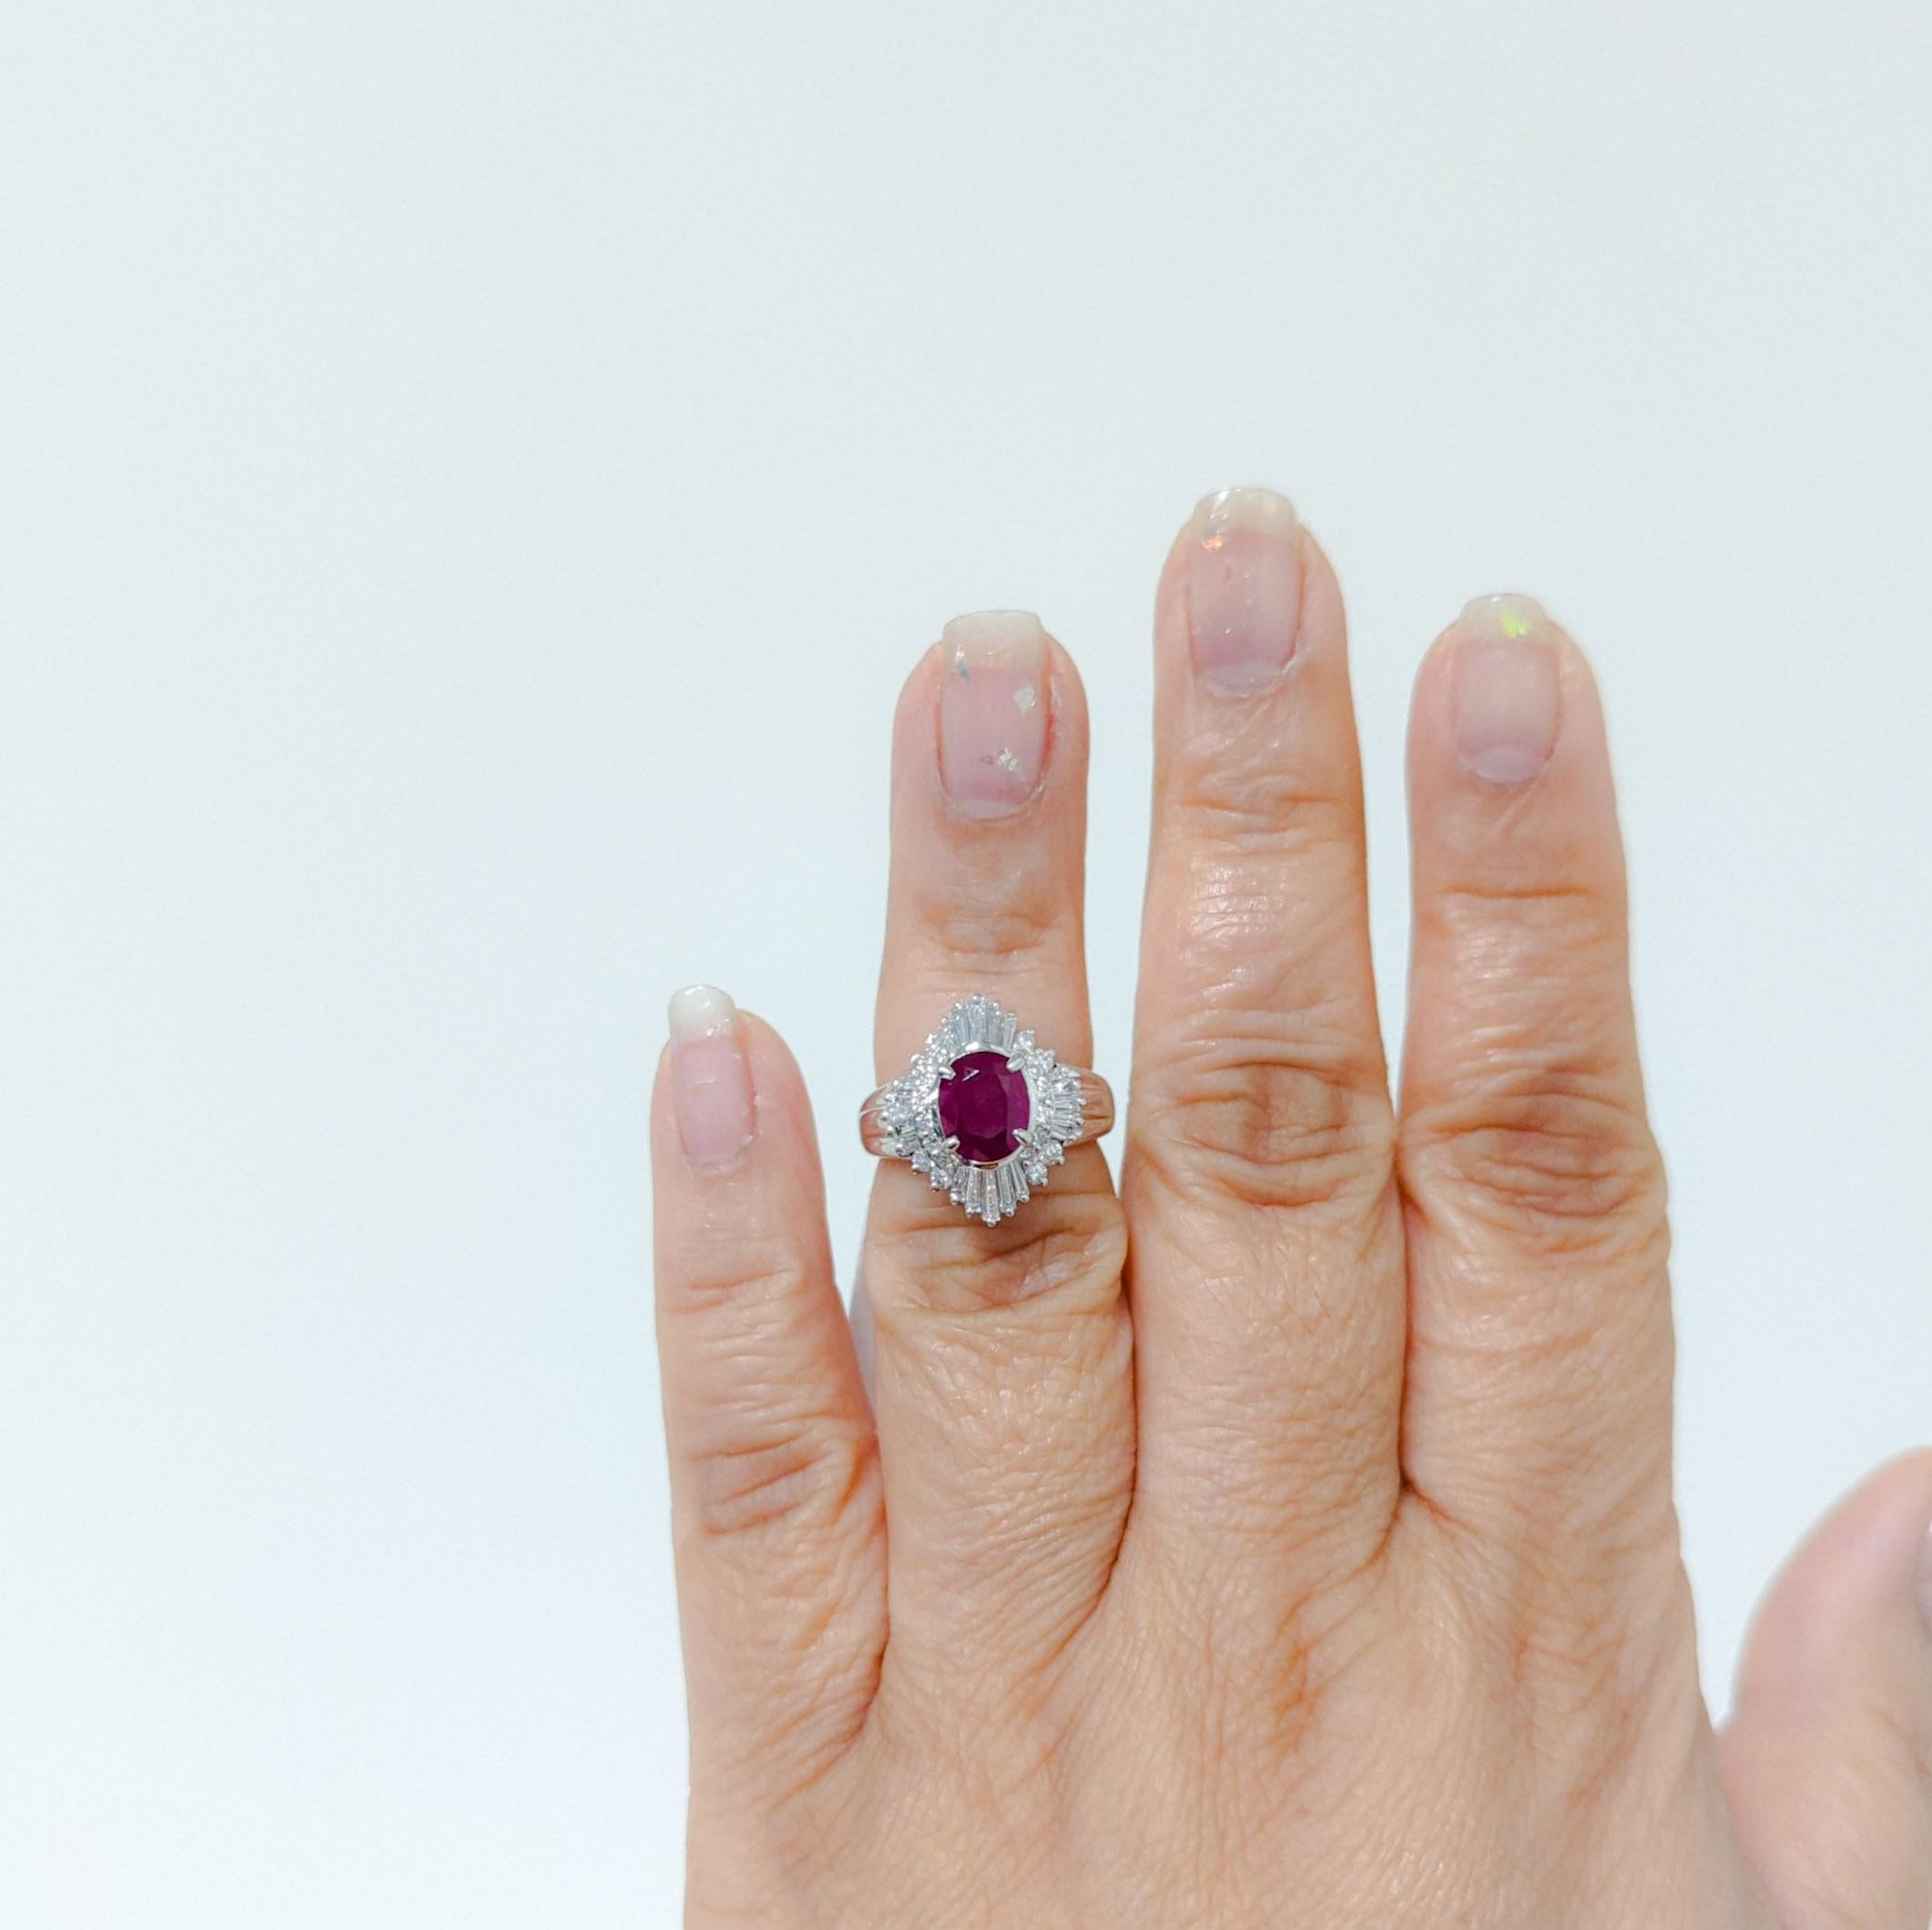 Beautiful 1.98 ct. good quality red ruby oval with 1.01 ct. good quality white diamond baguettes and rounds.  Handmade in platinum.  Ring size 5.75.